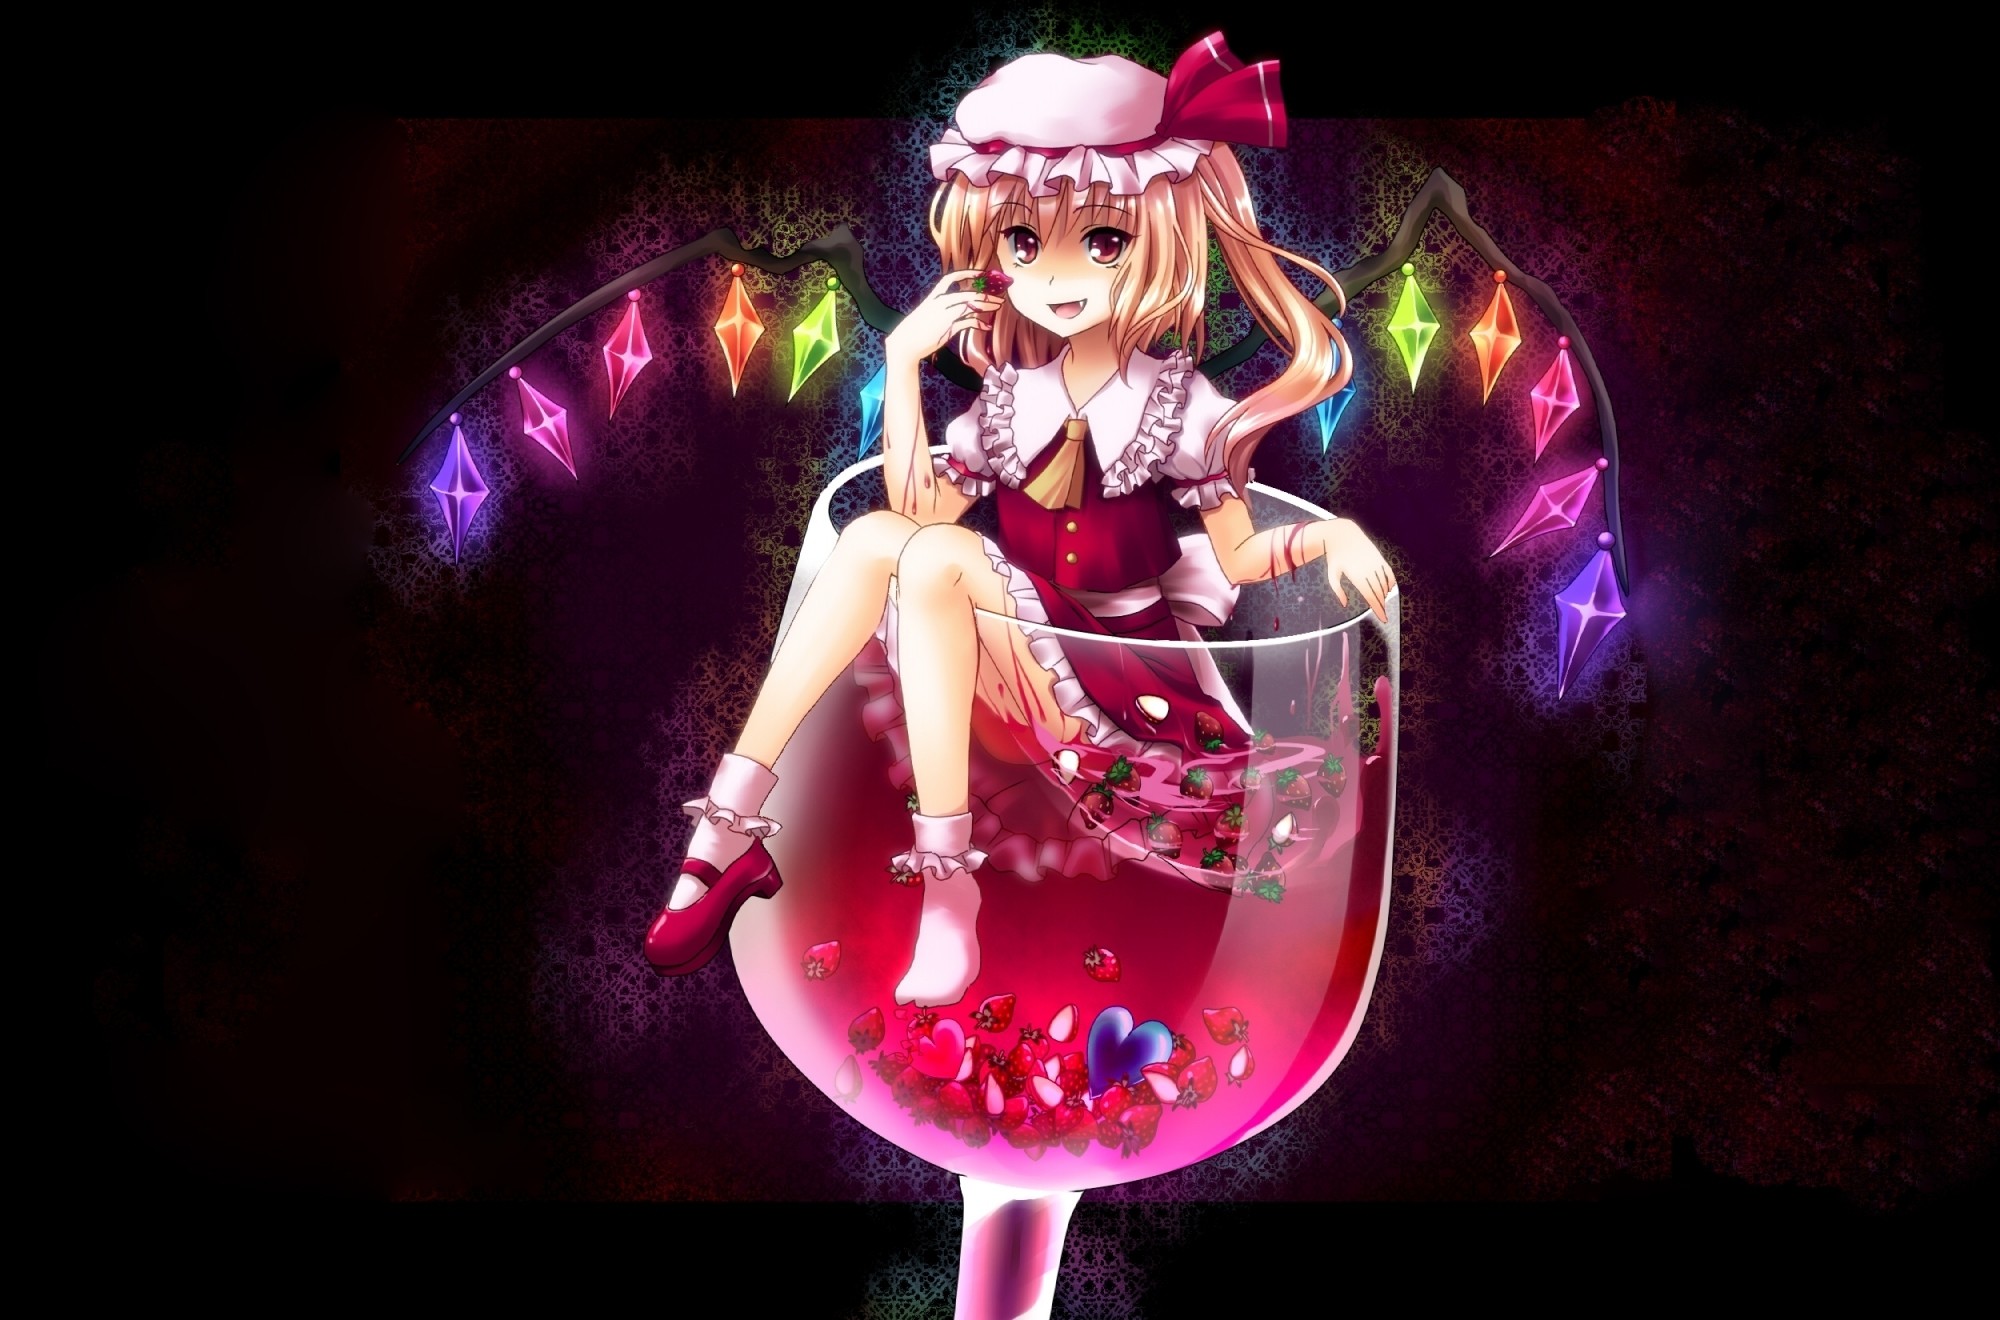 2000x1320 Flandre Scarlet images Sample HD wallpaper and background photos